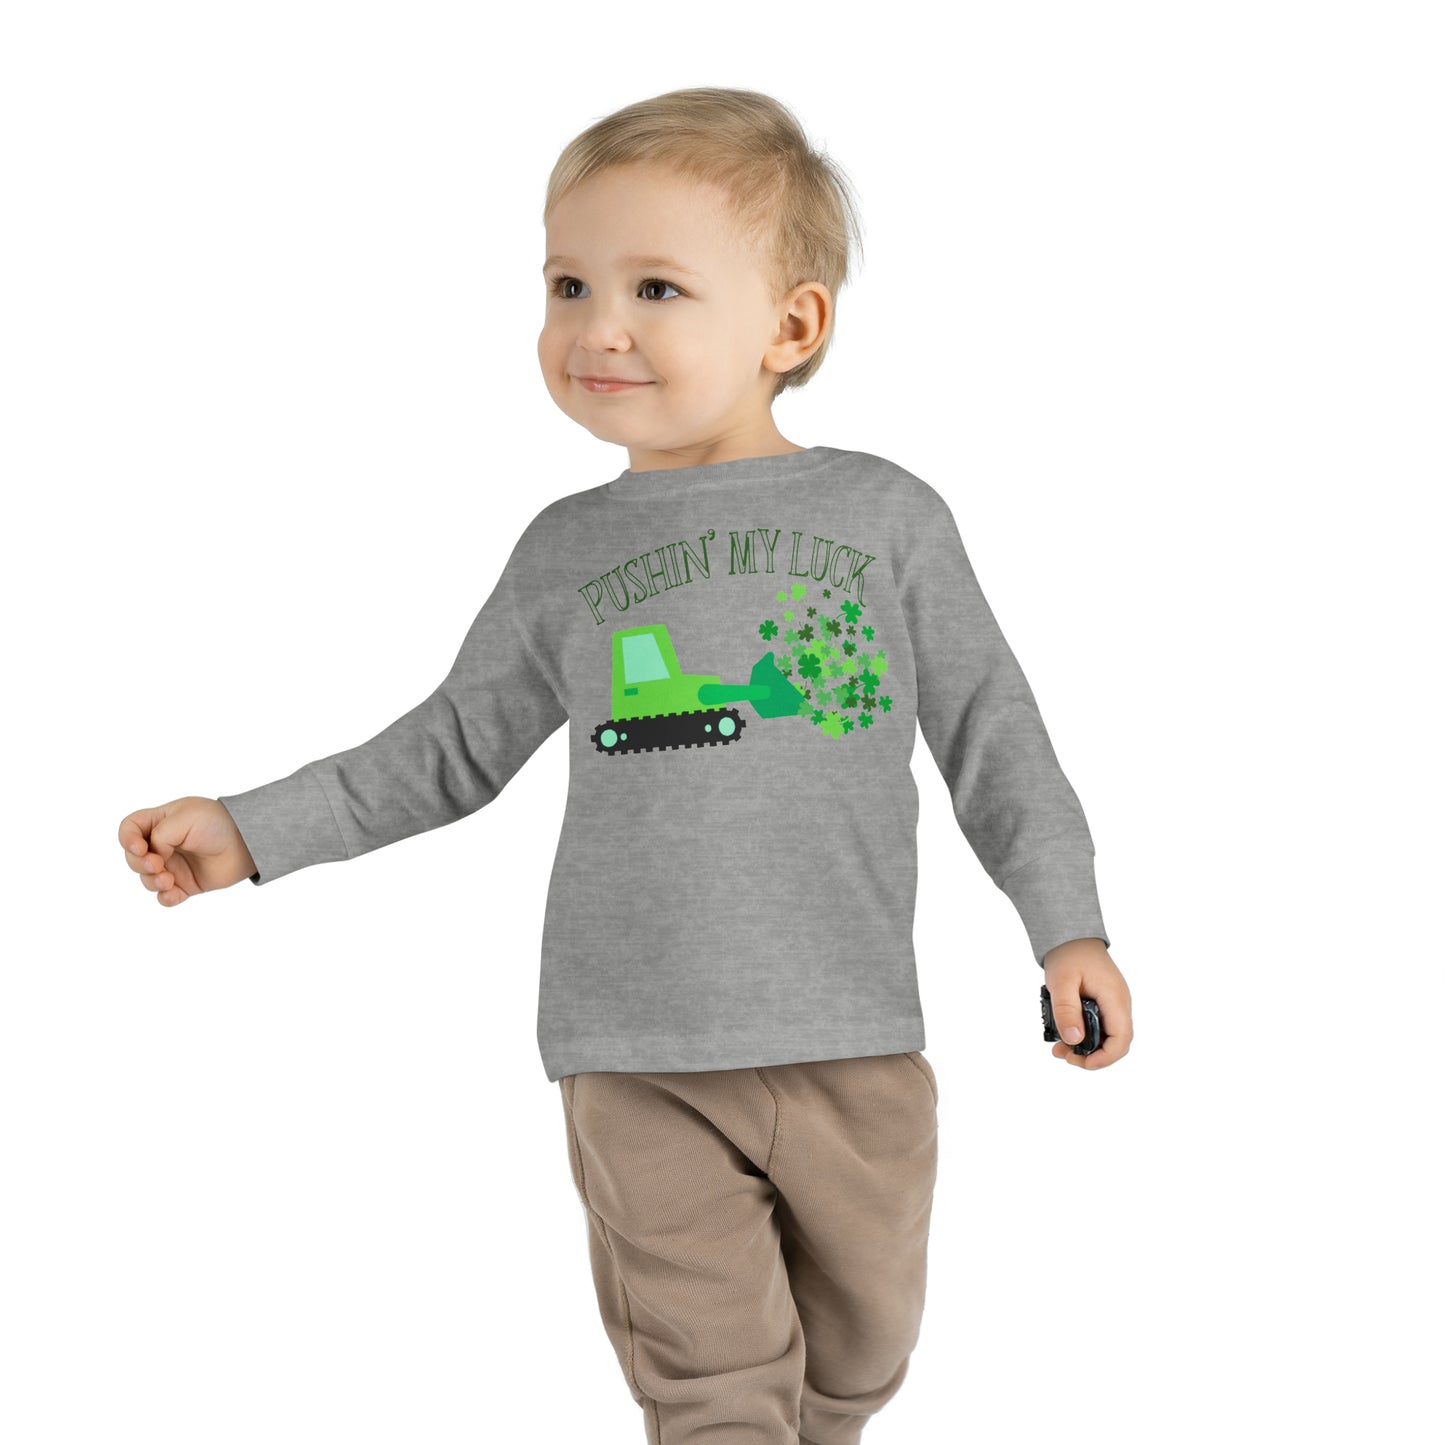 Pushin' My Luck | Bulldozer Toddler Long Sleeve Tee for St. Patrick's Day